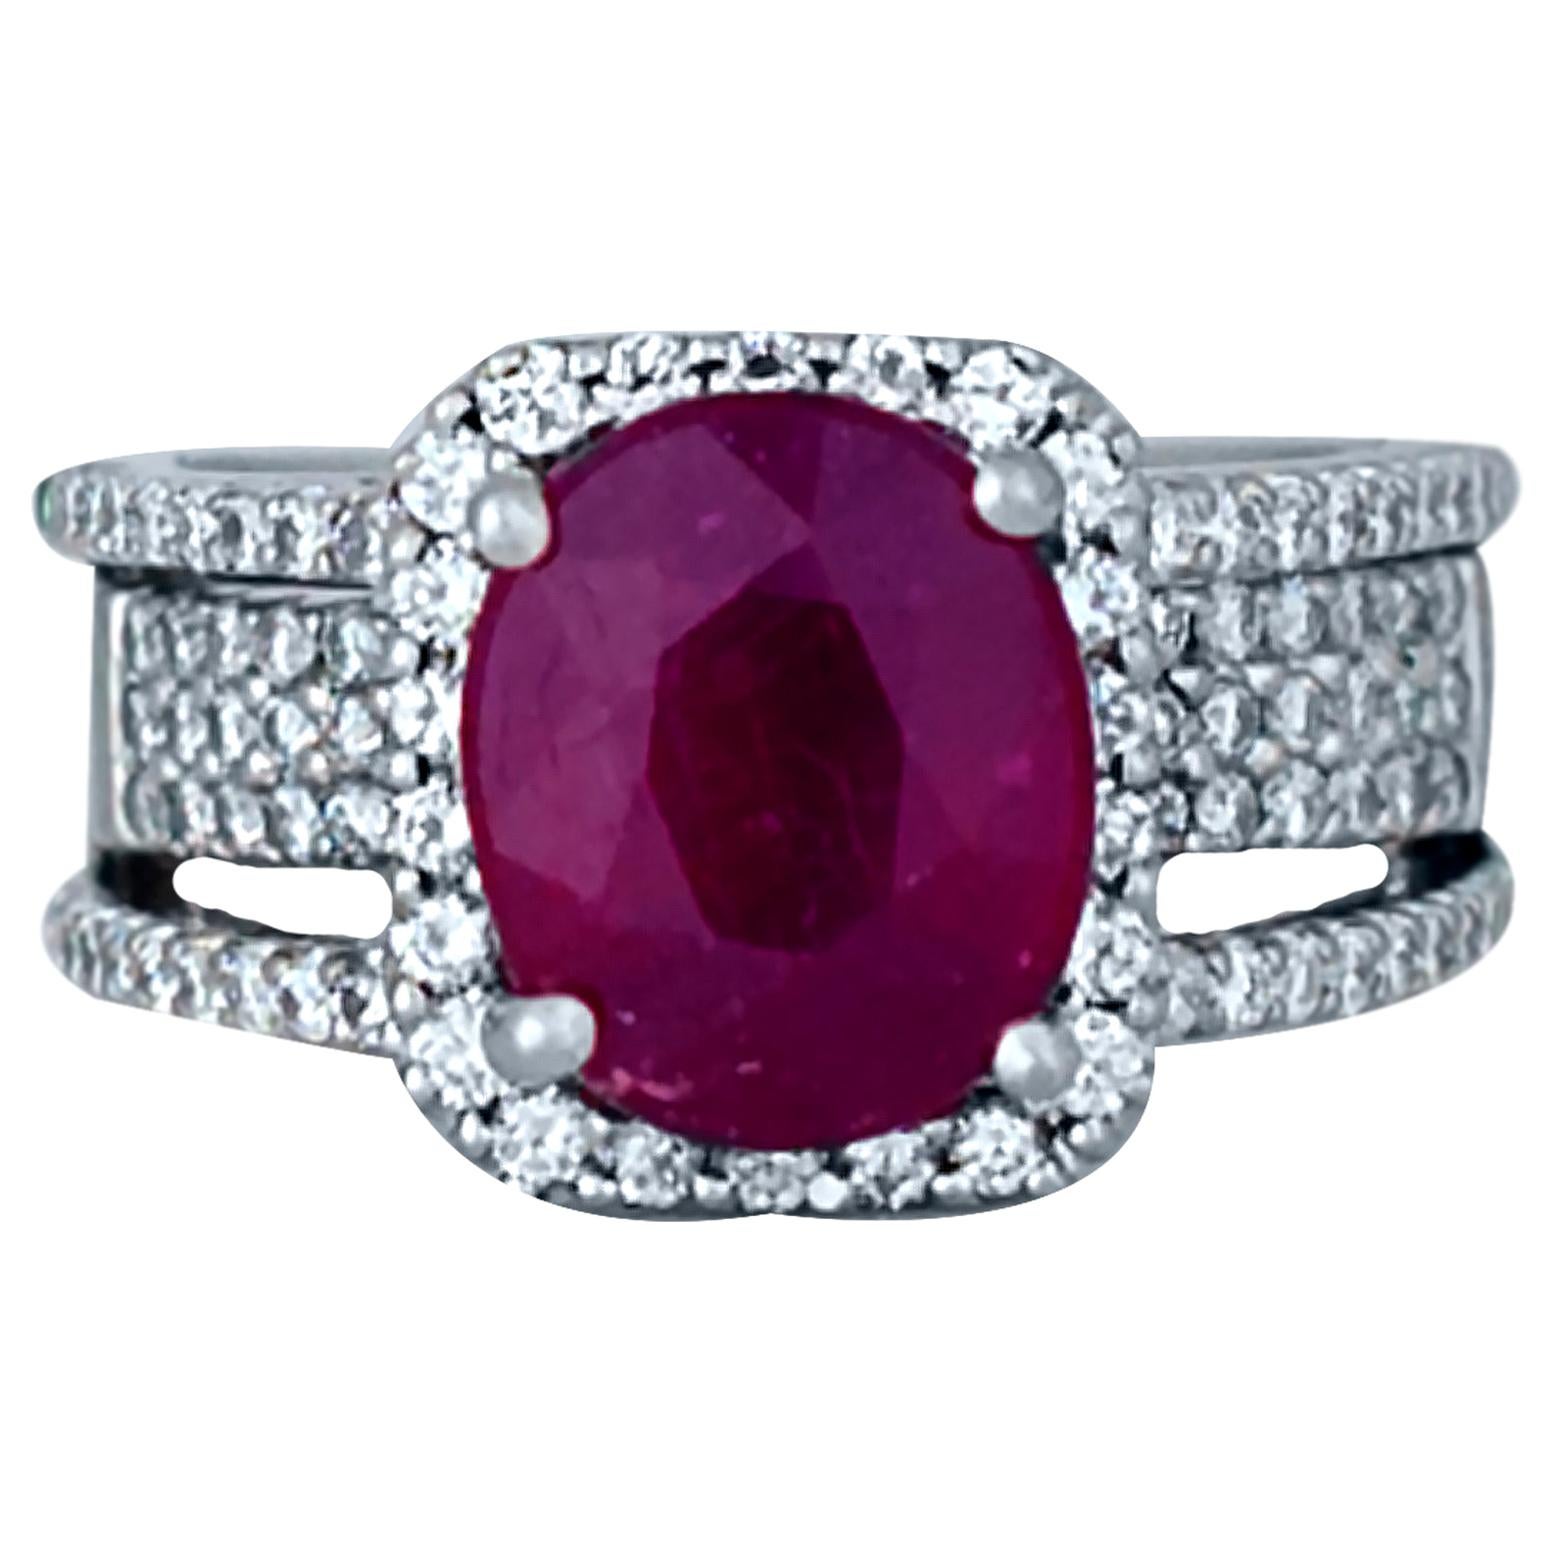 6 Carat Ruby and Diamond Ring